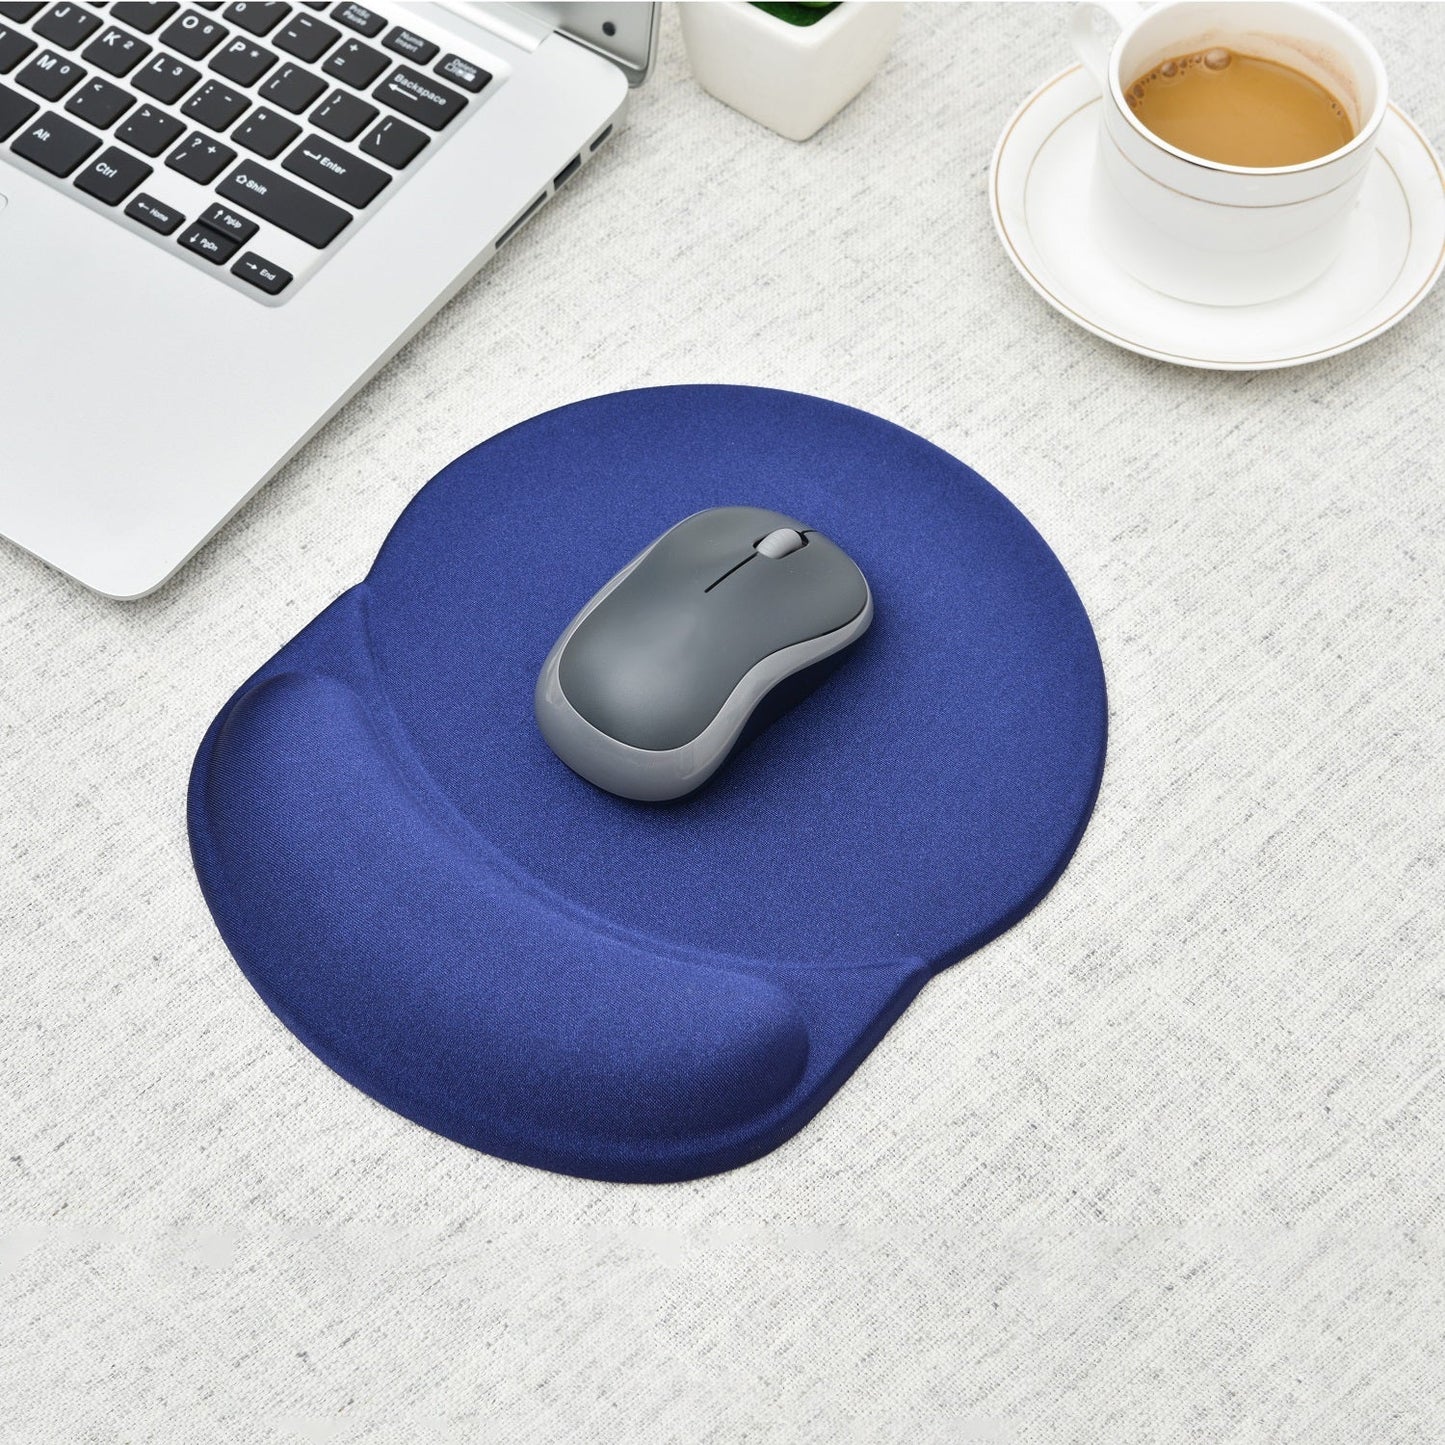 DAC® MP-123 Super-Gel "Racetrack" Mouse Pad with Palm Support, Blue